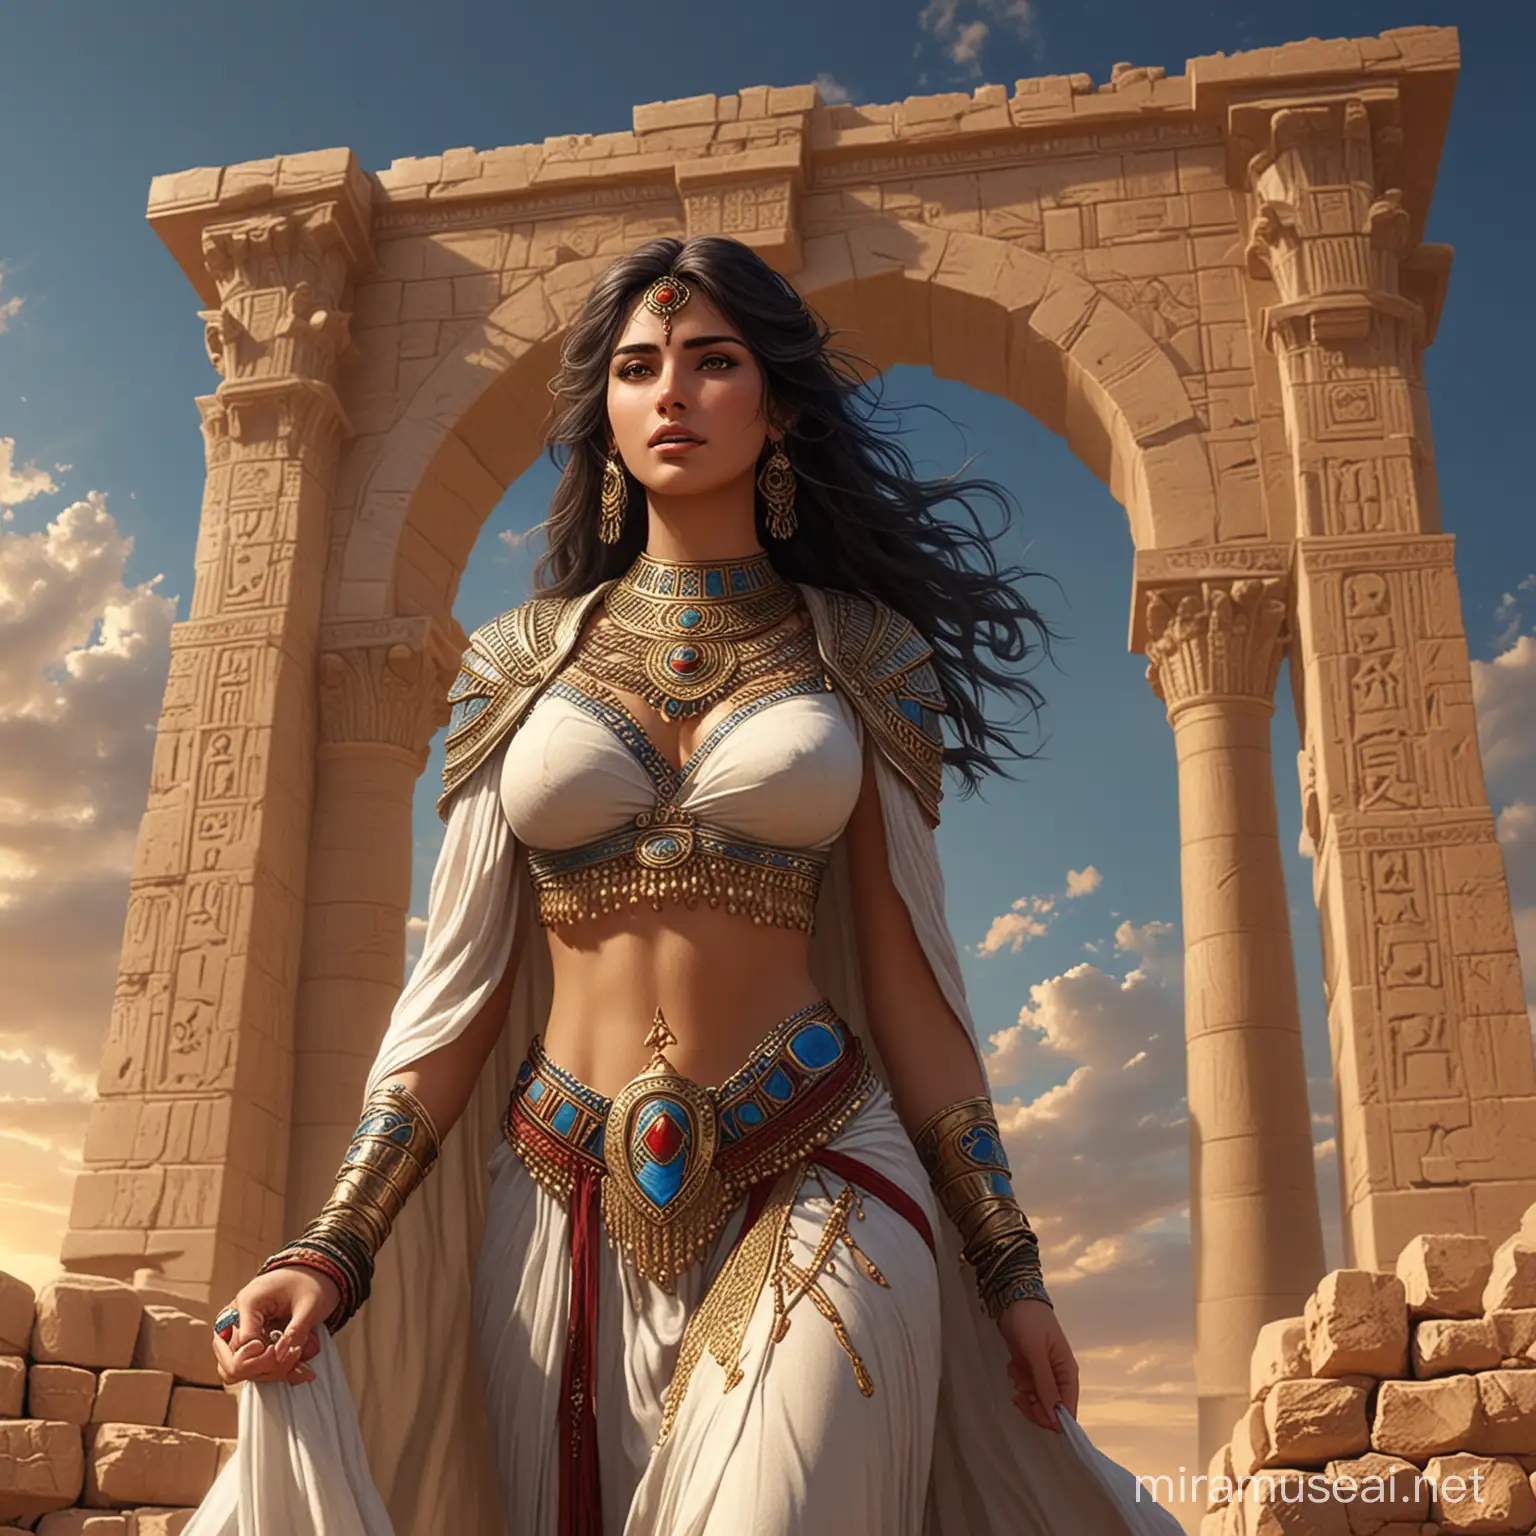 Ishtar Goddess of Love and War in Animated Heroic Garb